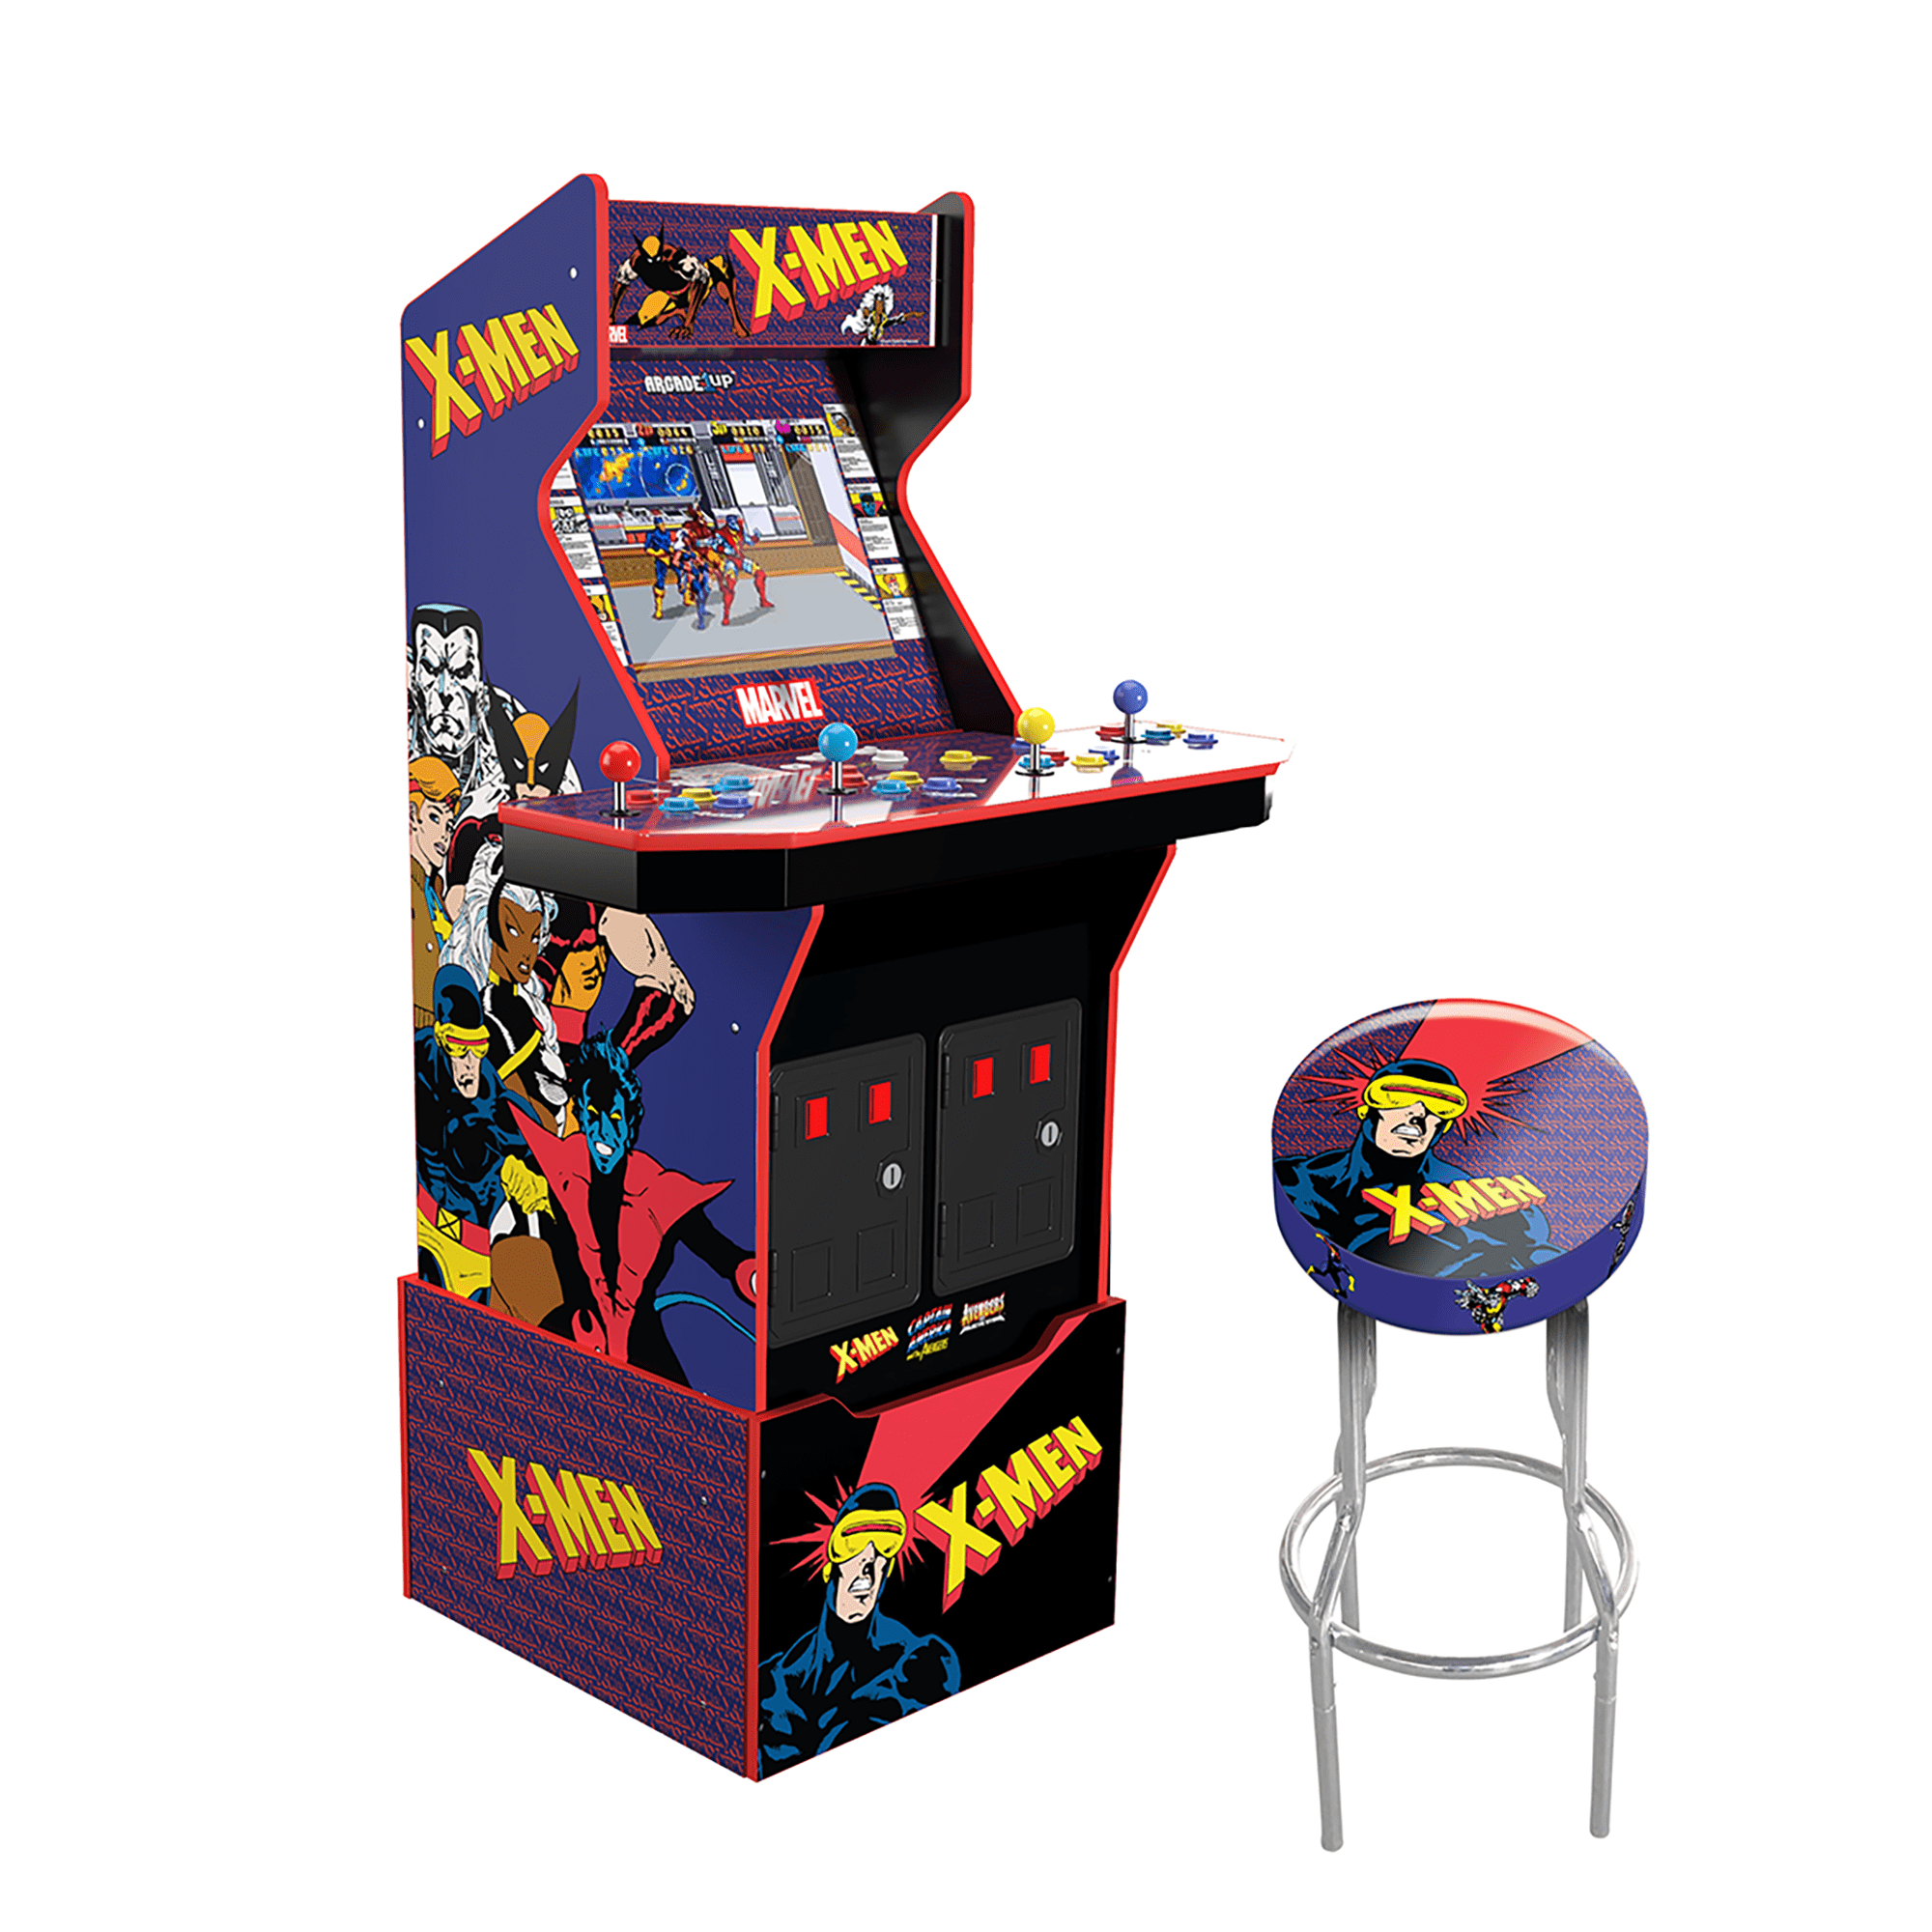 CartoonNetworkPR on X: Game ON! Cartoon Network Arcade is now